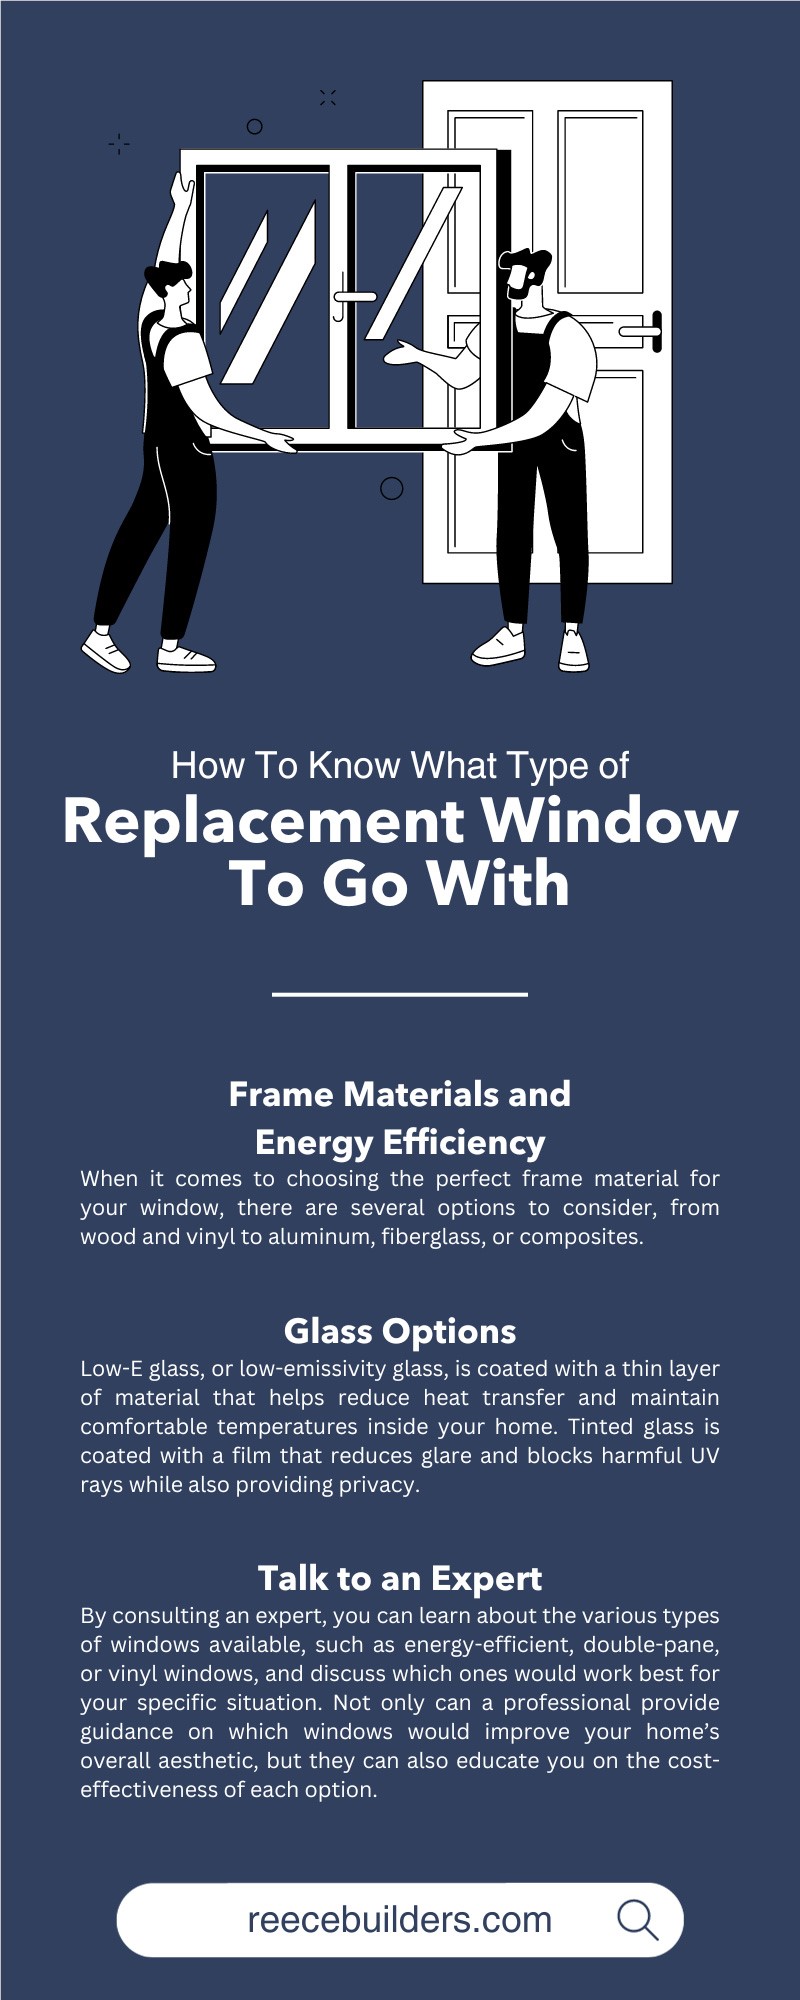 How To Know What Type of Replacement Window To Go With